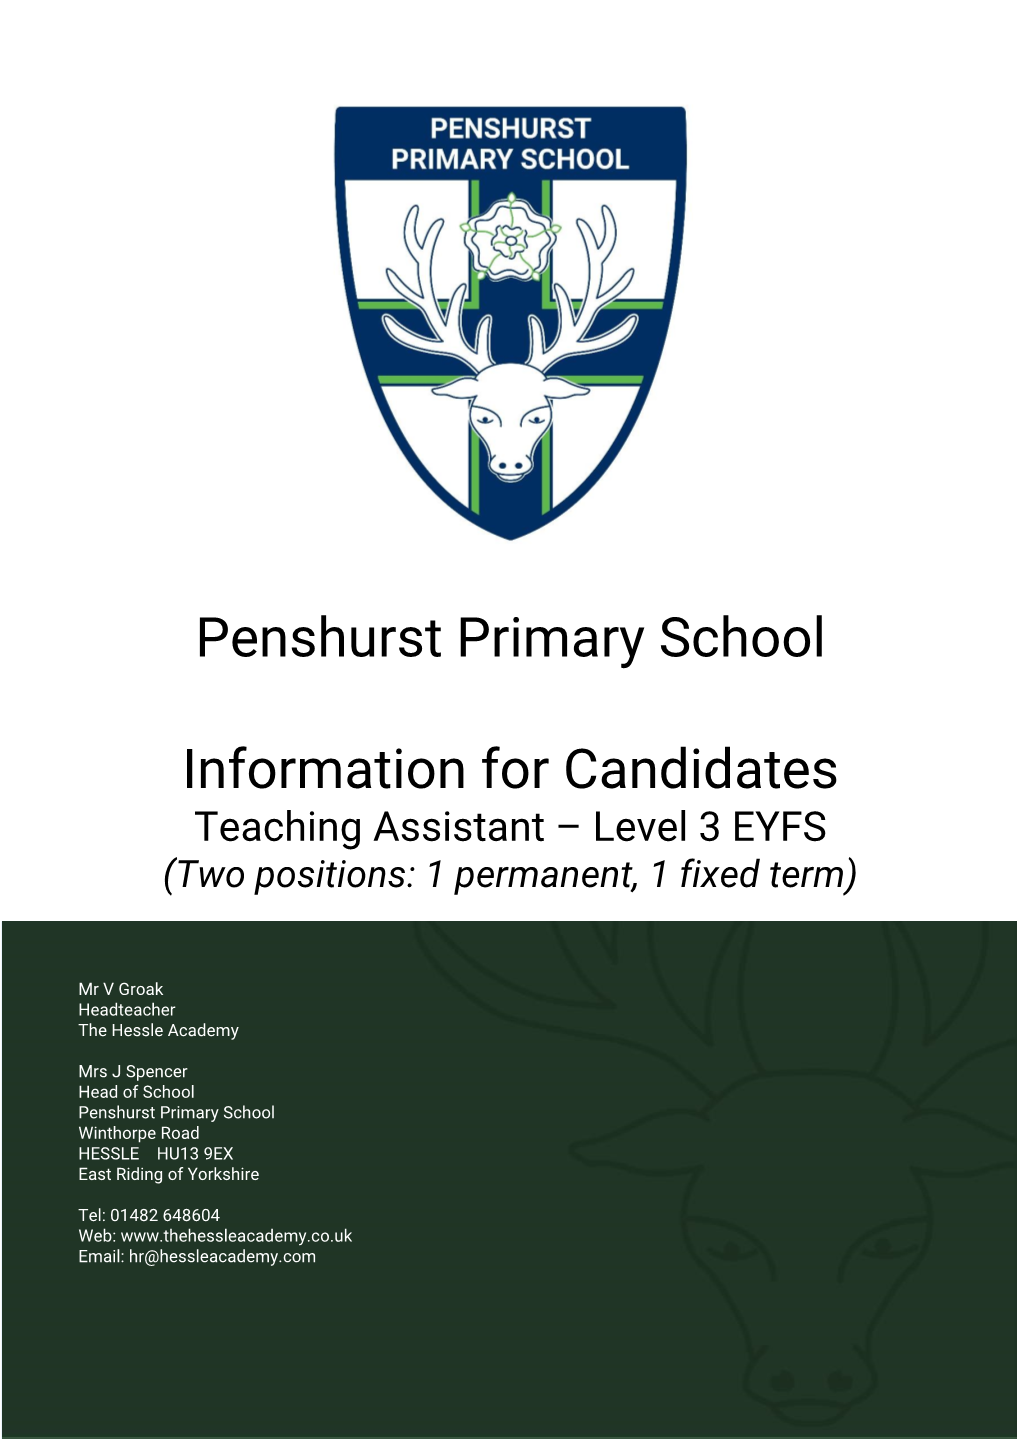 Penshurst Primary School Information for Candidates